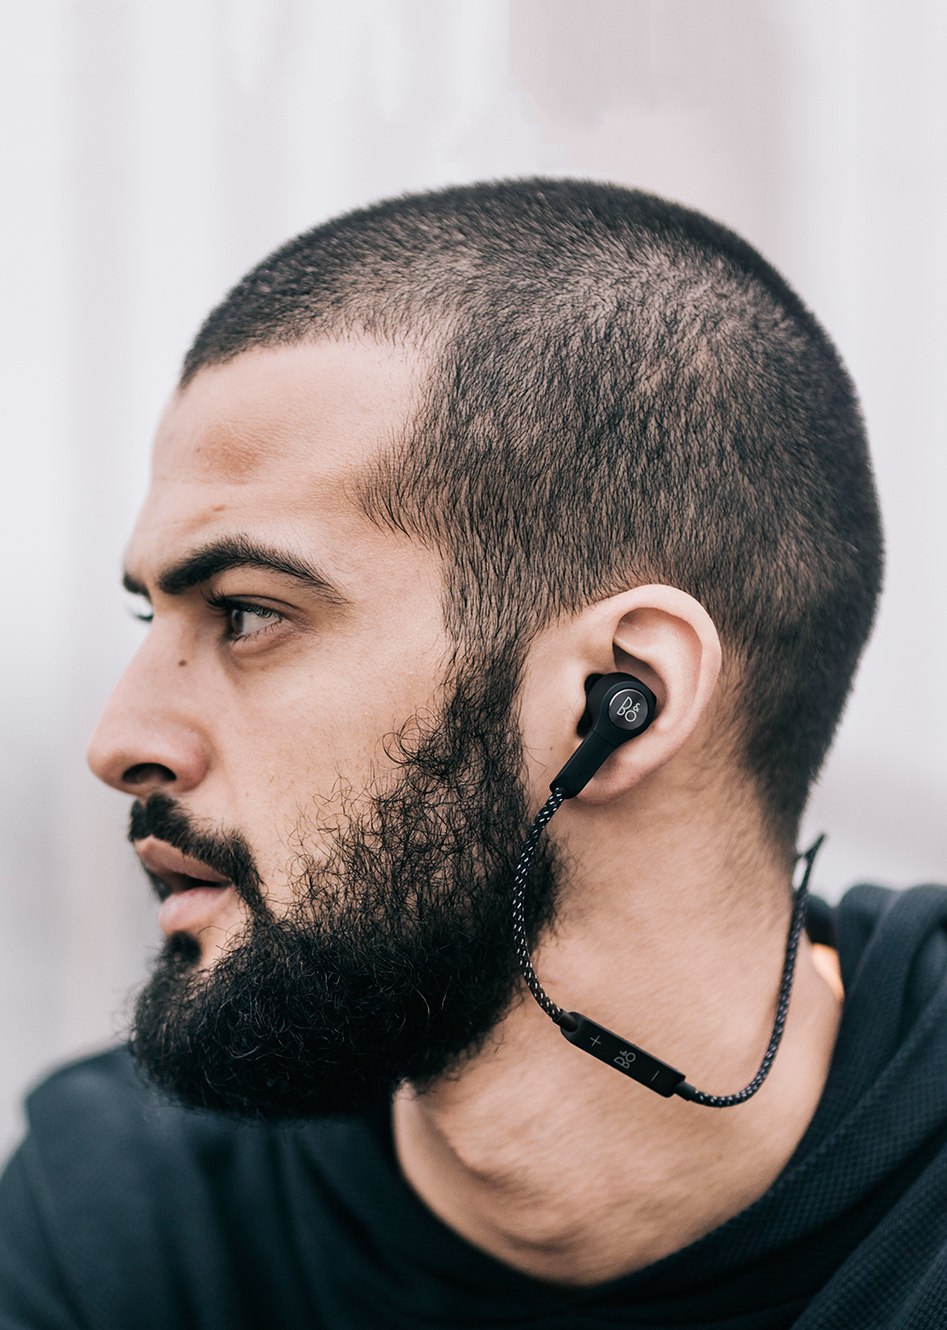 b and o wireless earbuds